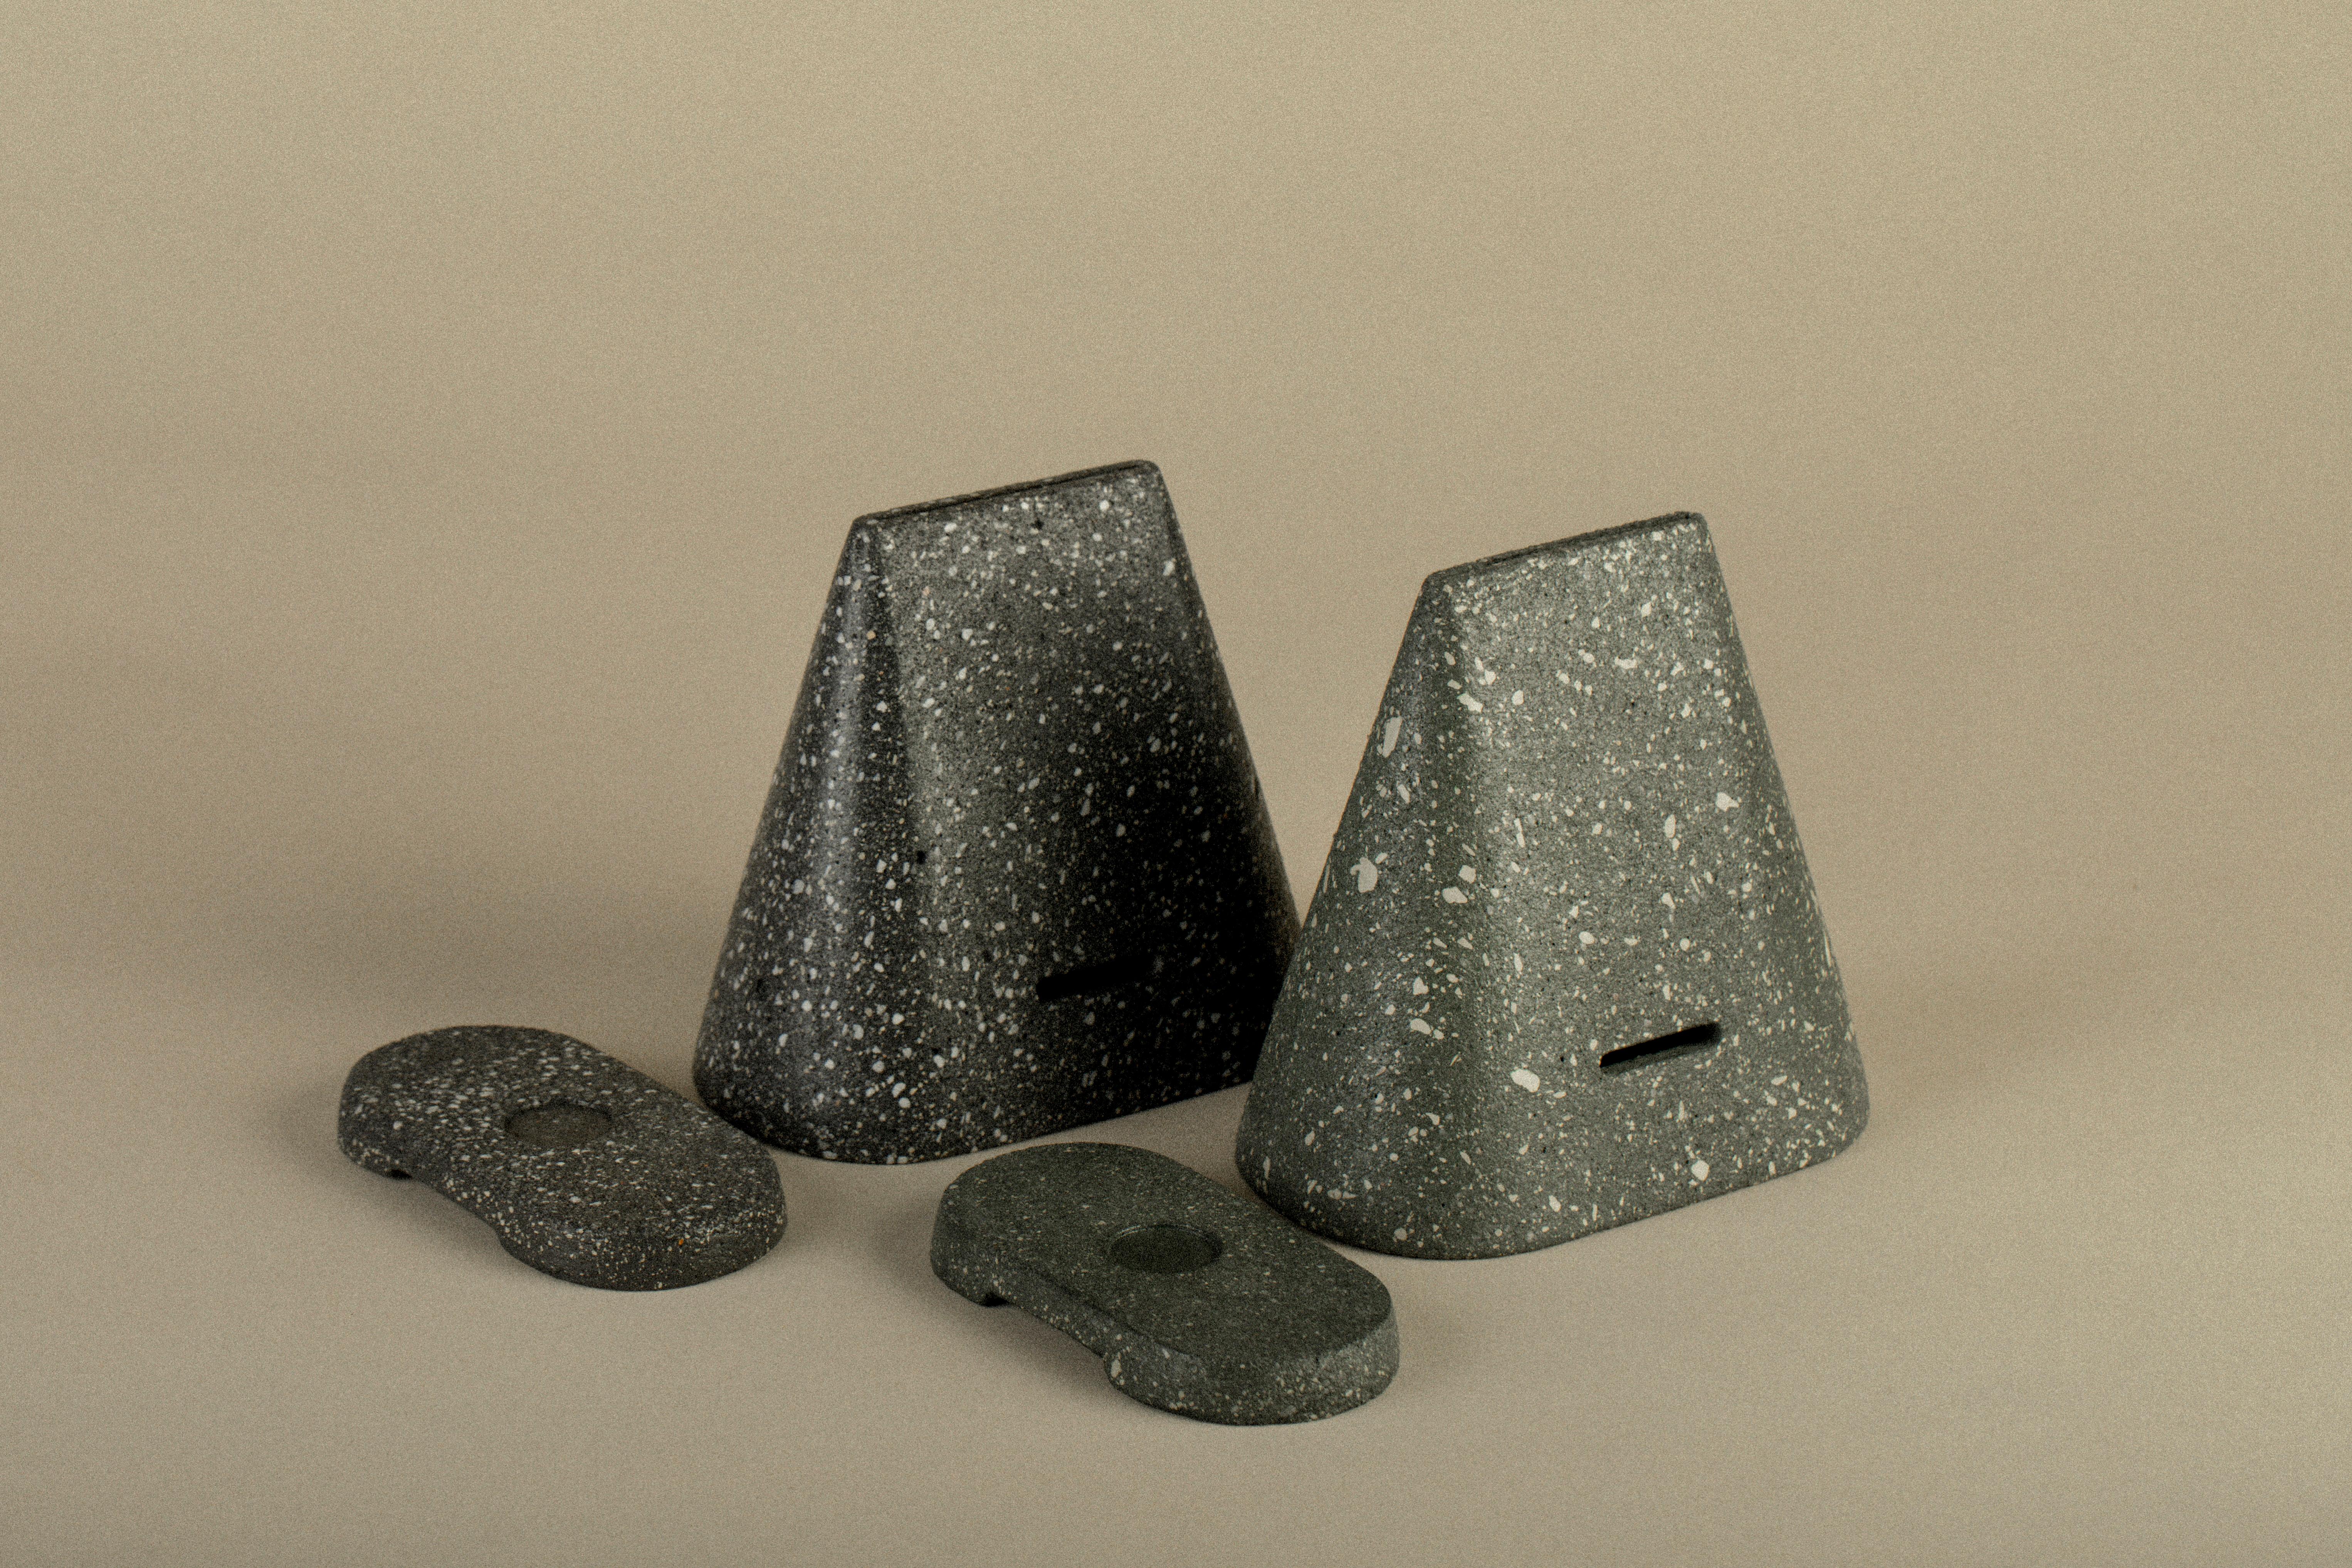 Set of 2 Humo Lineal incense diffuser by Algo Studio
By Diego Garza
Designed by Diego Garza
Dimensions: D 7.5 x W 12 x H 11.5 cm
Materials: Casted concrete terrazzo.
Colors: black, dark green.

Incense cone burner and diffuser, its geometry